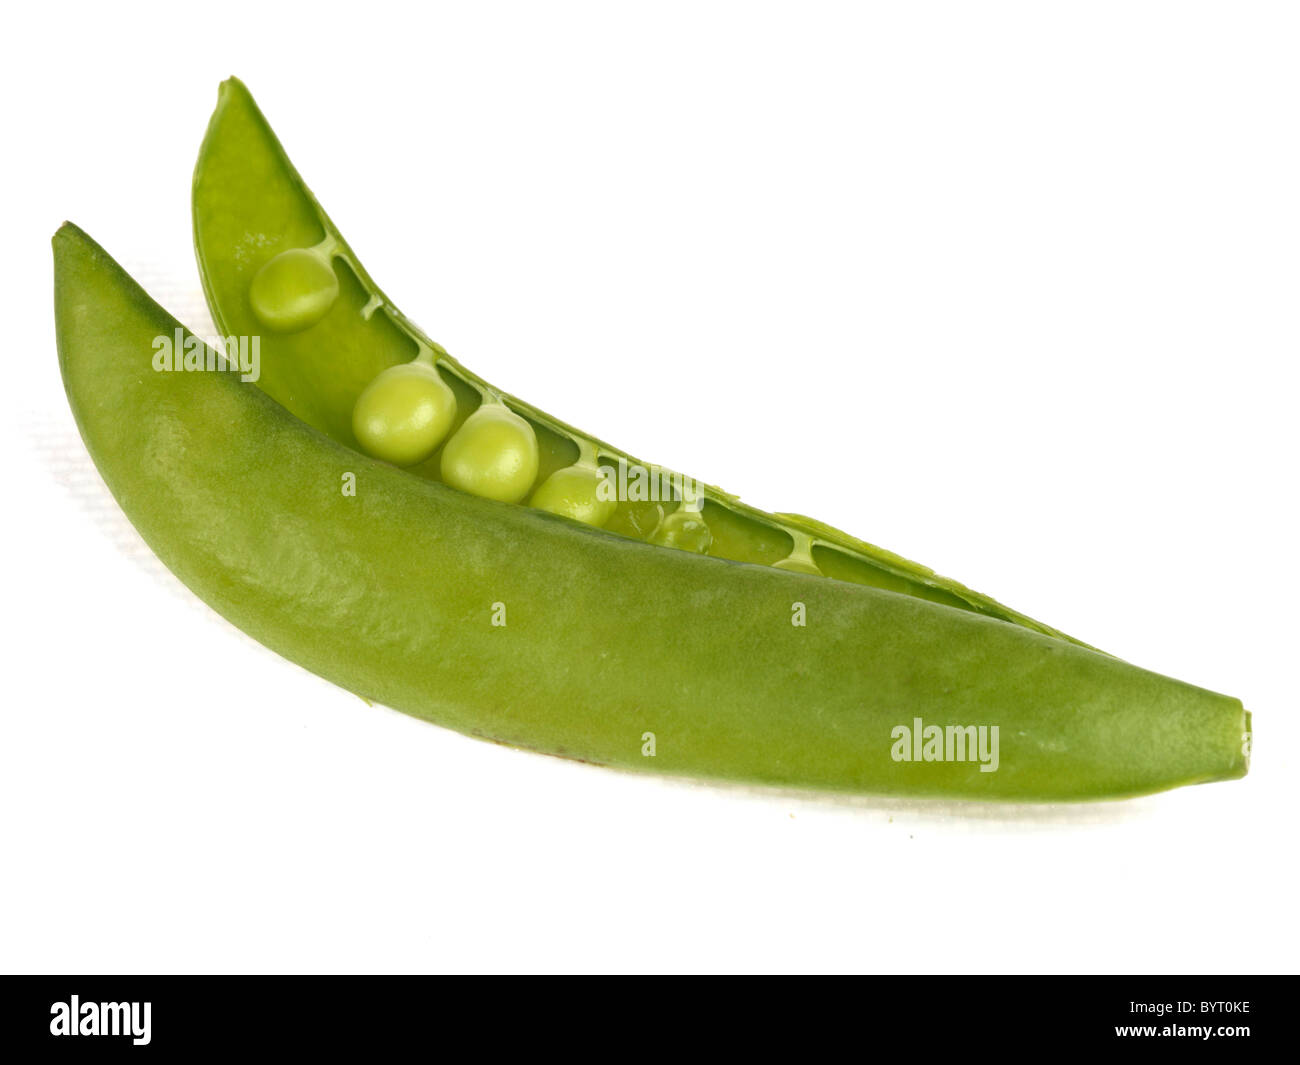 Fresh Ripe Uncooked Raw Garden Green Peas In Pods With No People Against A White Background With A Clipping Path Stock Photo